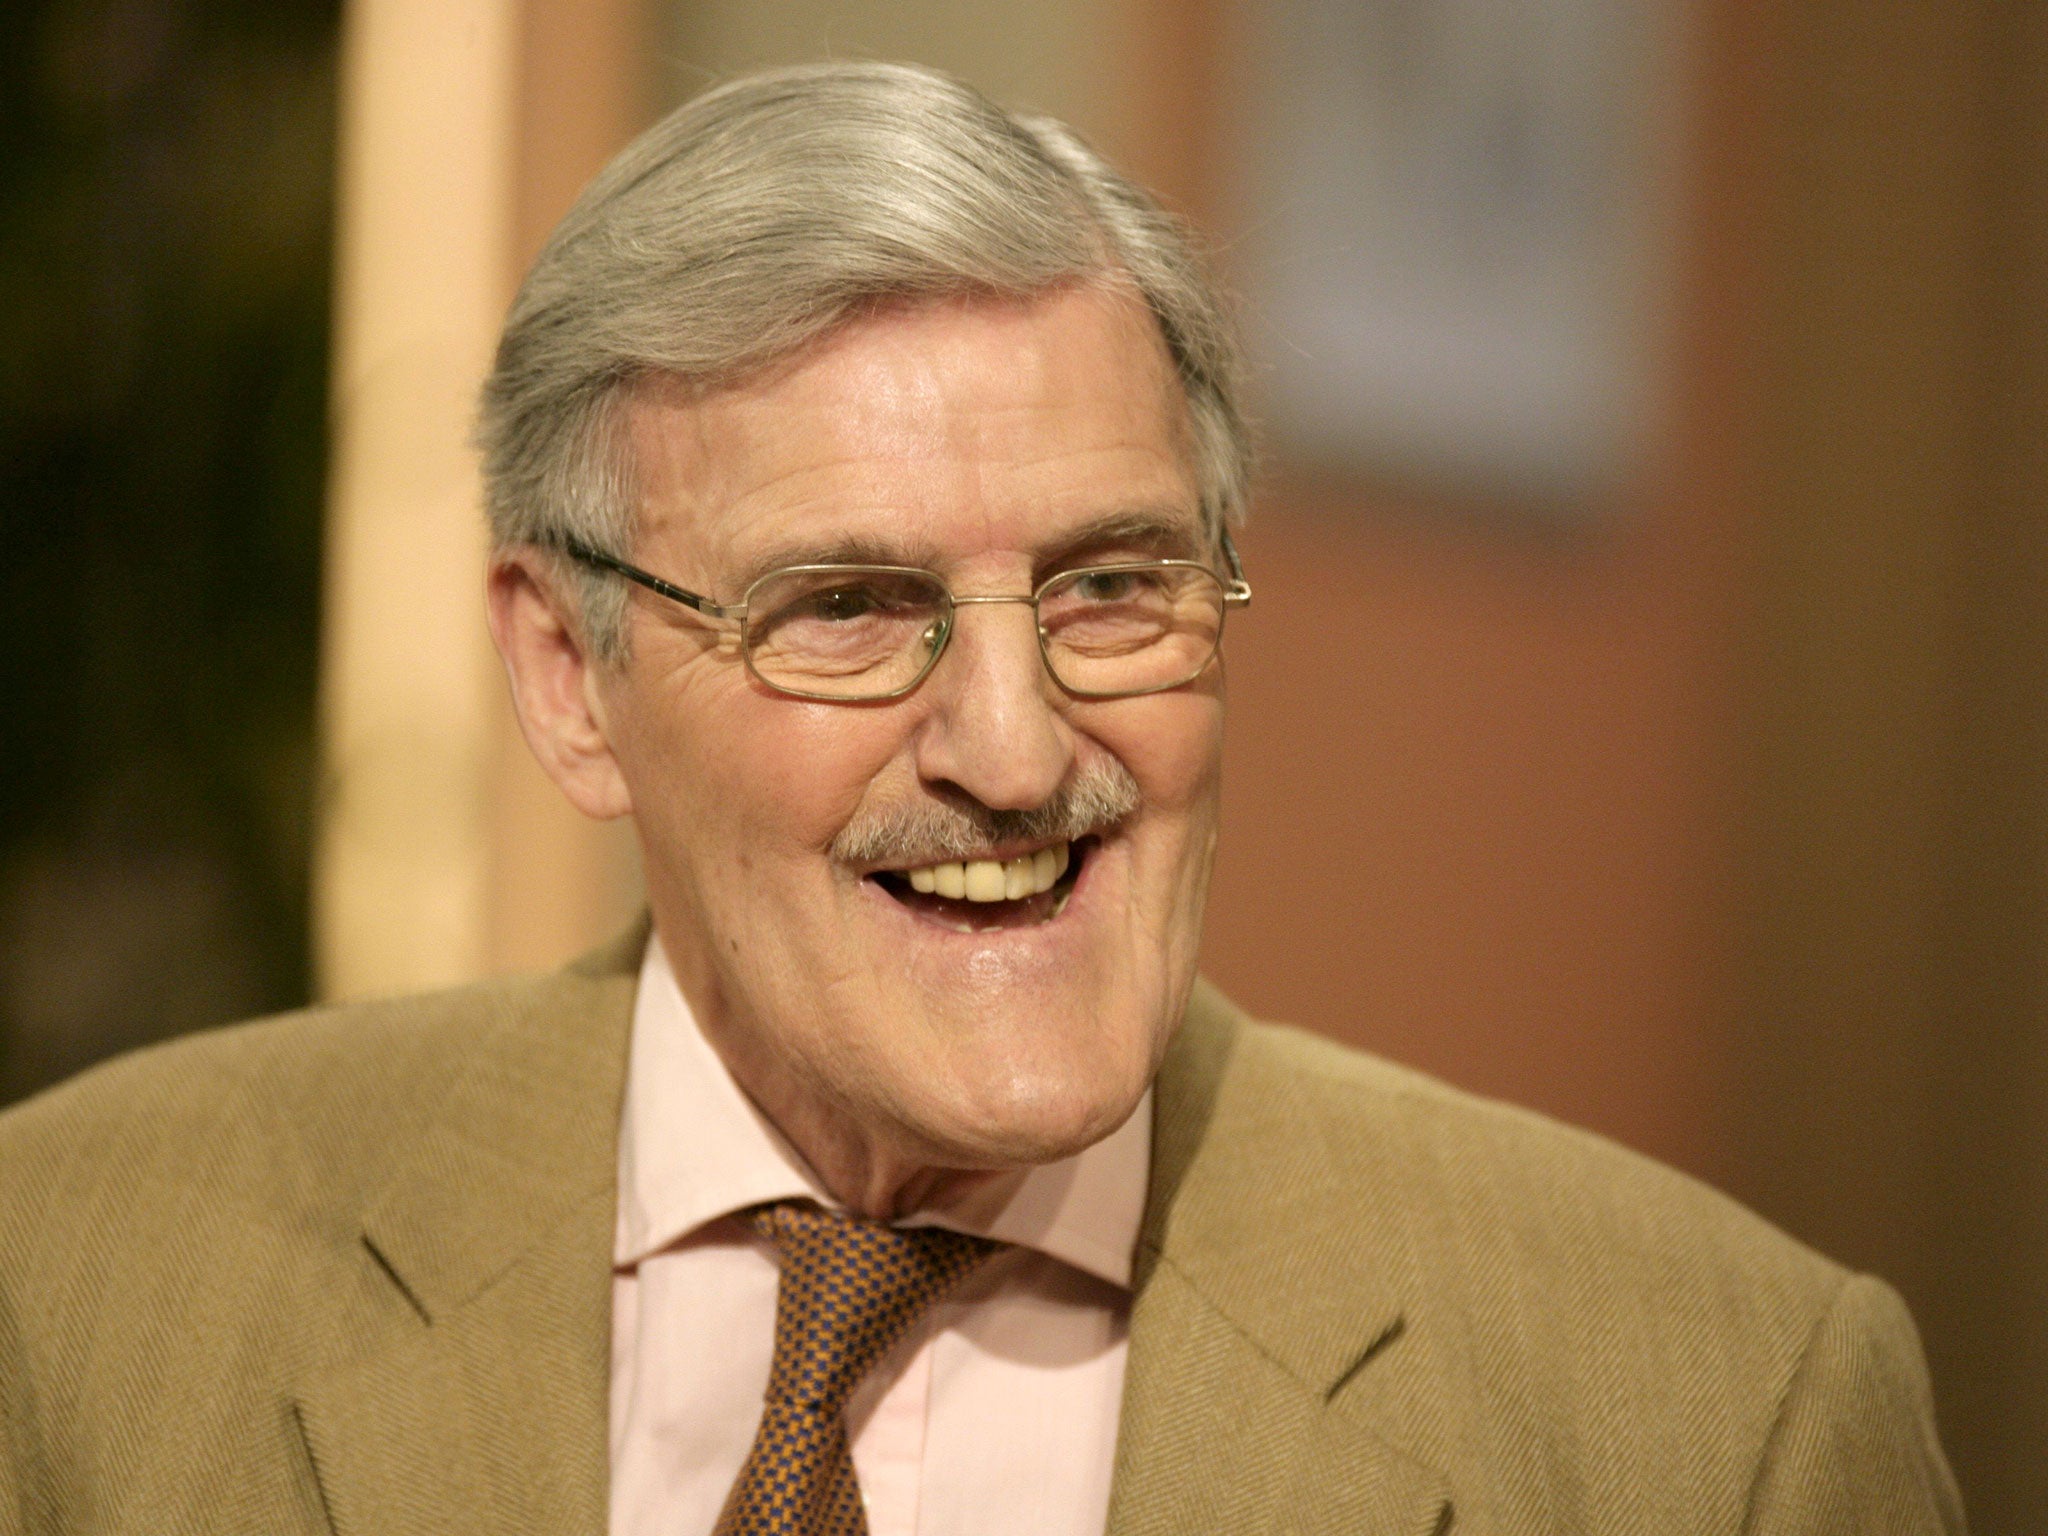 Jimmy Hill worked on every major international championship from 1966 to 1998 as a commentator or analyst